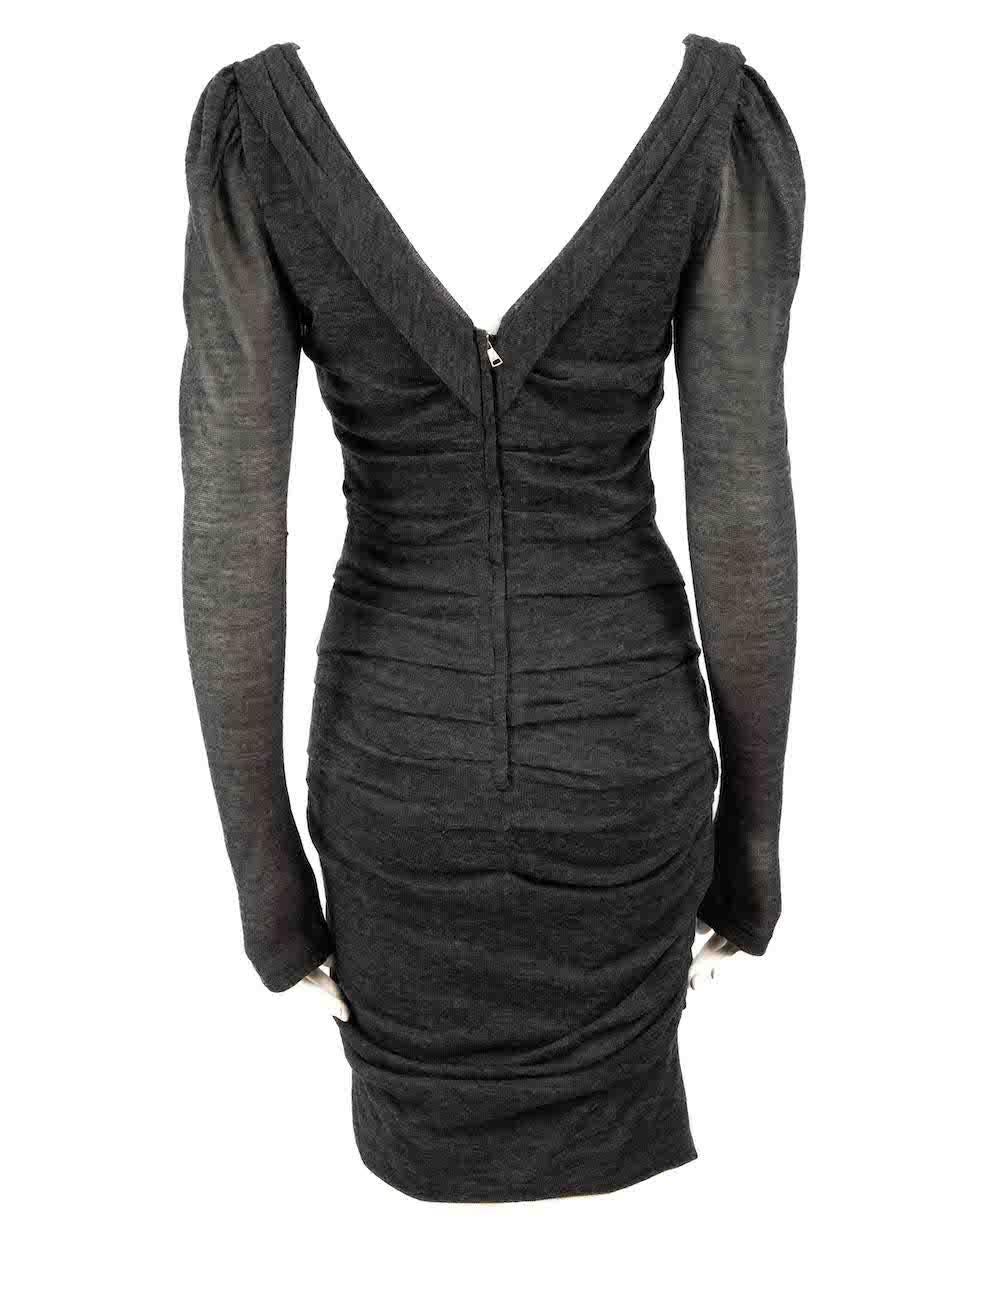 Dolce & Gabbana Grey Wool Drape Neck Ruched Dress Size M In Good Condition For Sale In London, GB